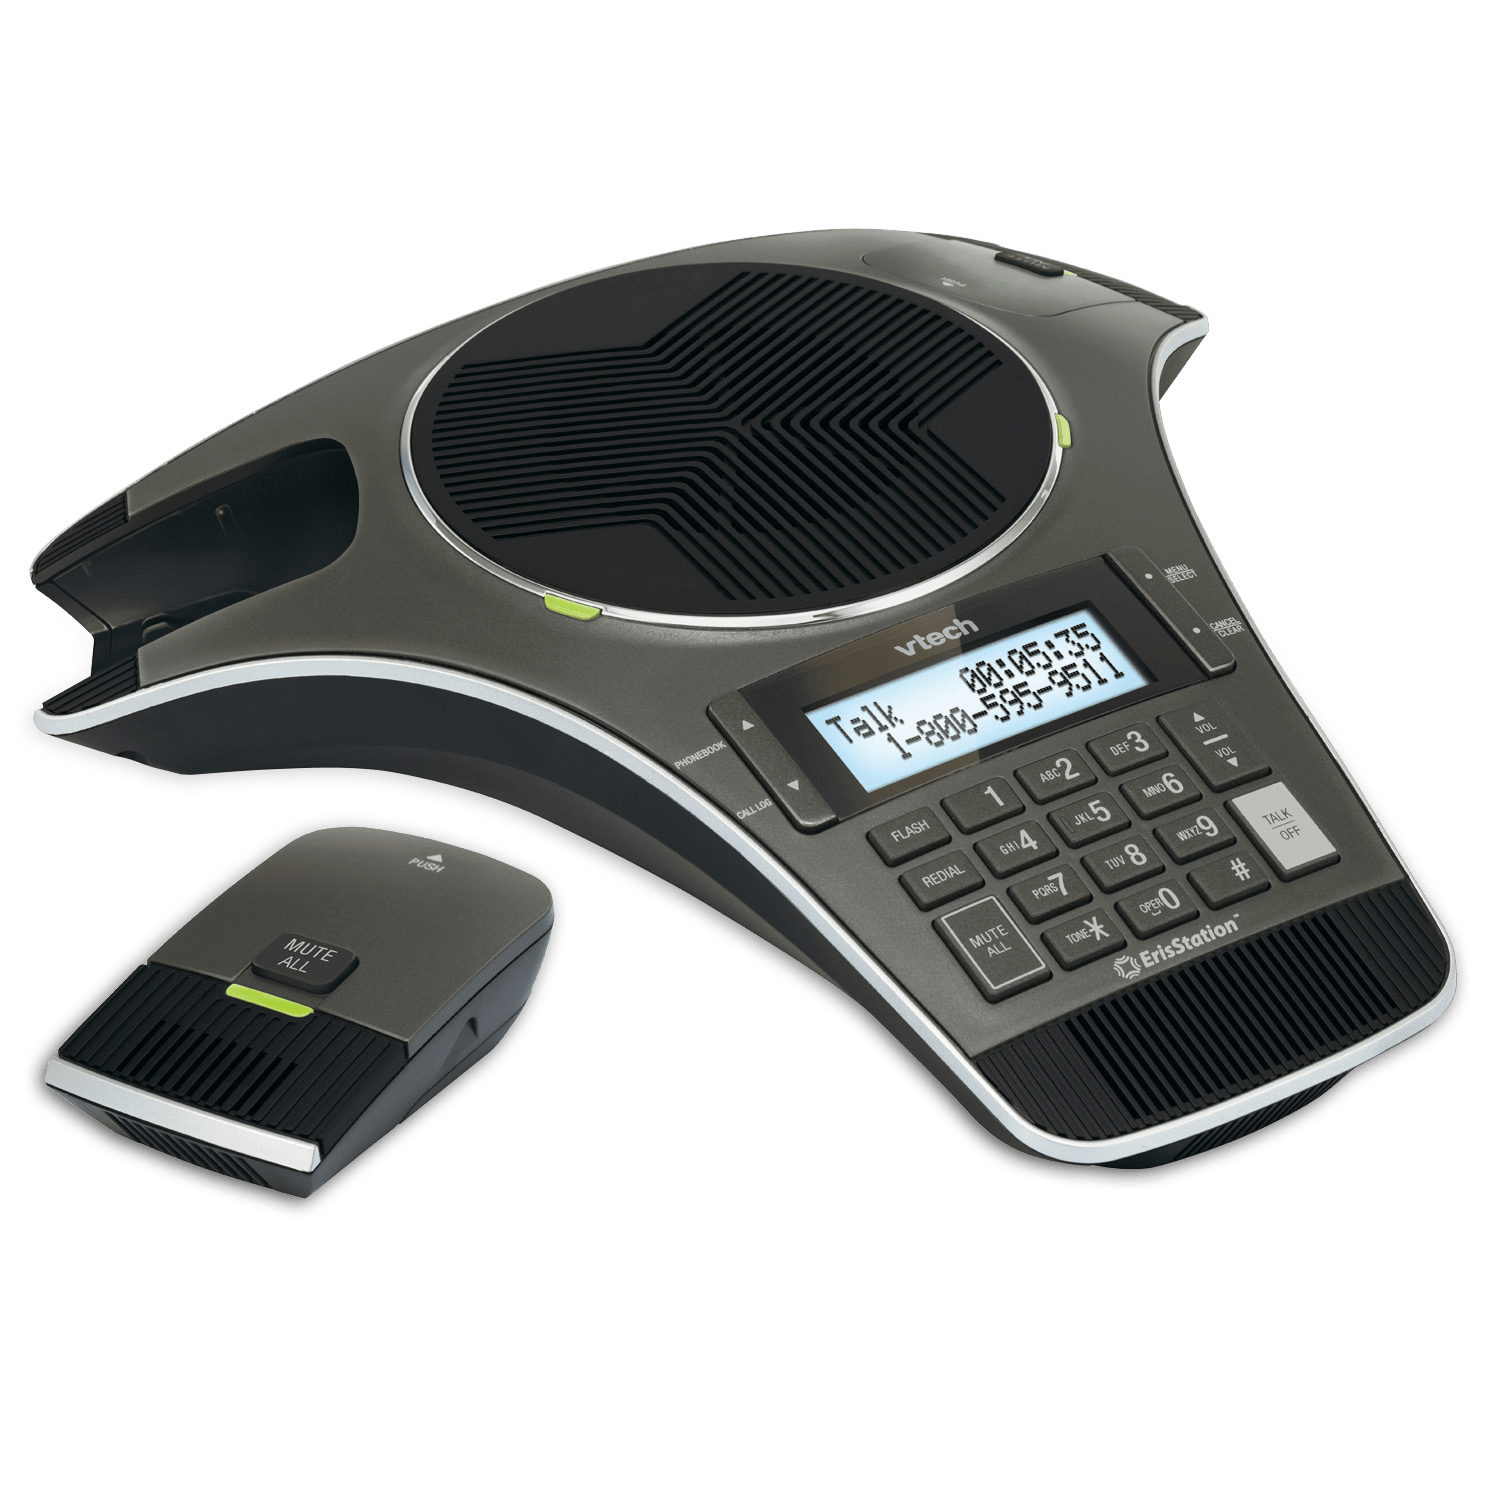 ErisStation® Conference Phone with Two Wireless Mics